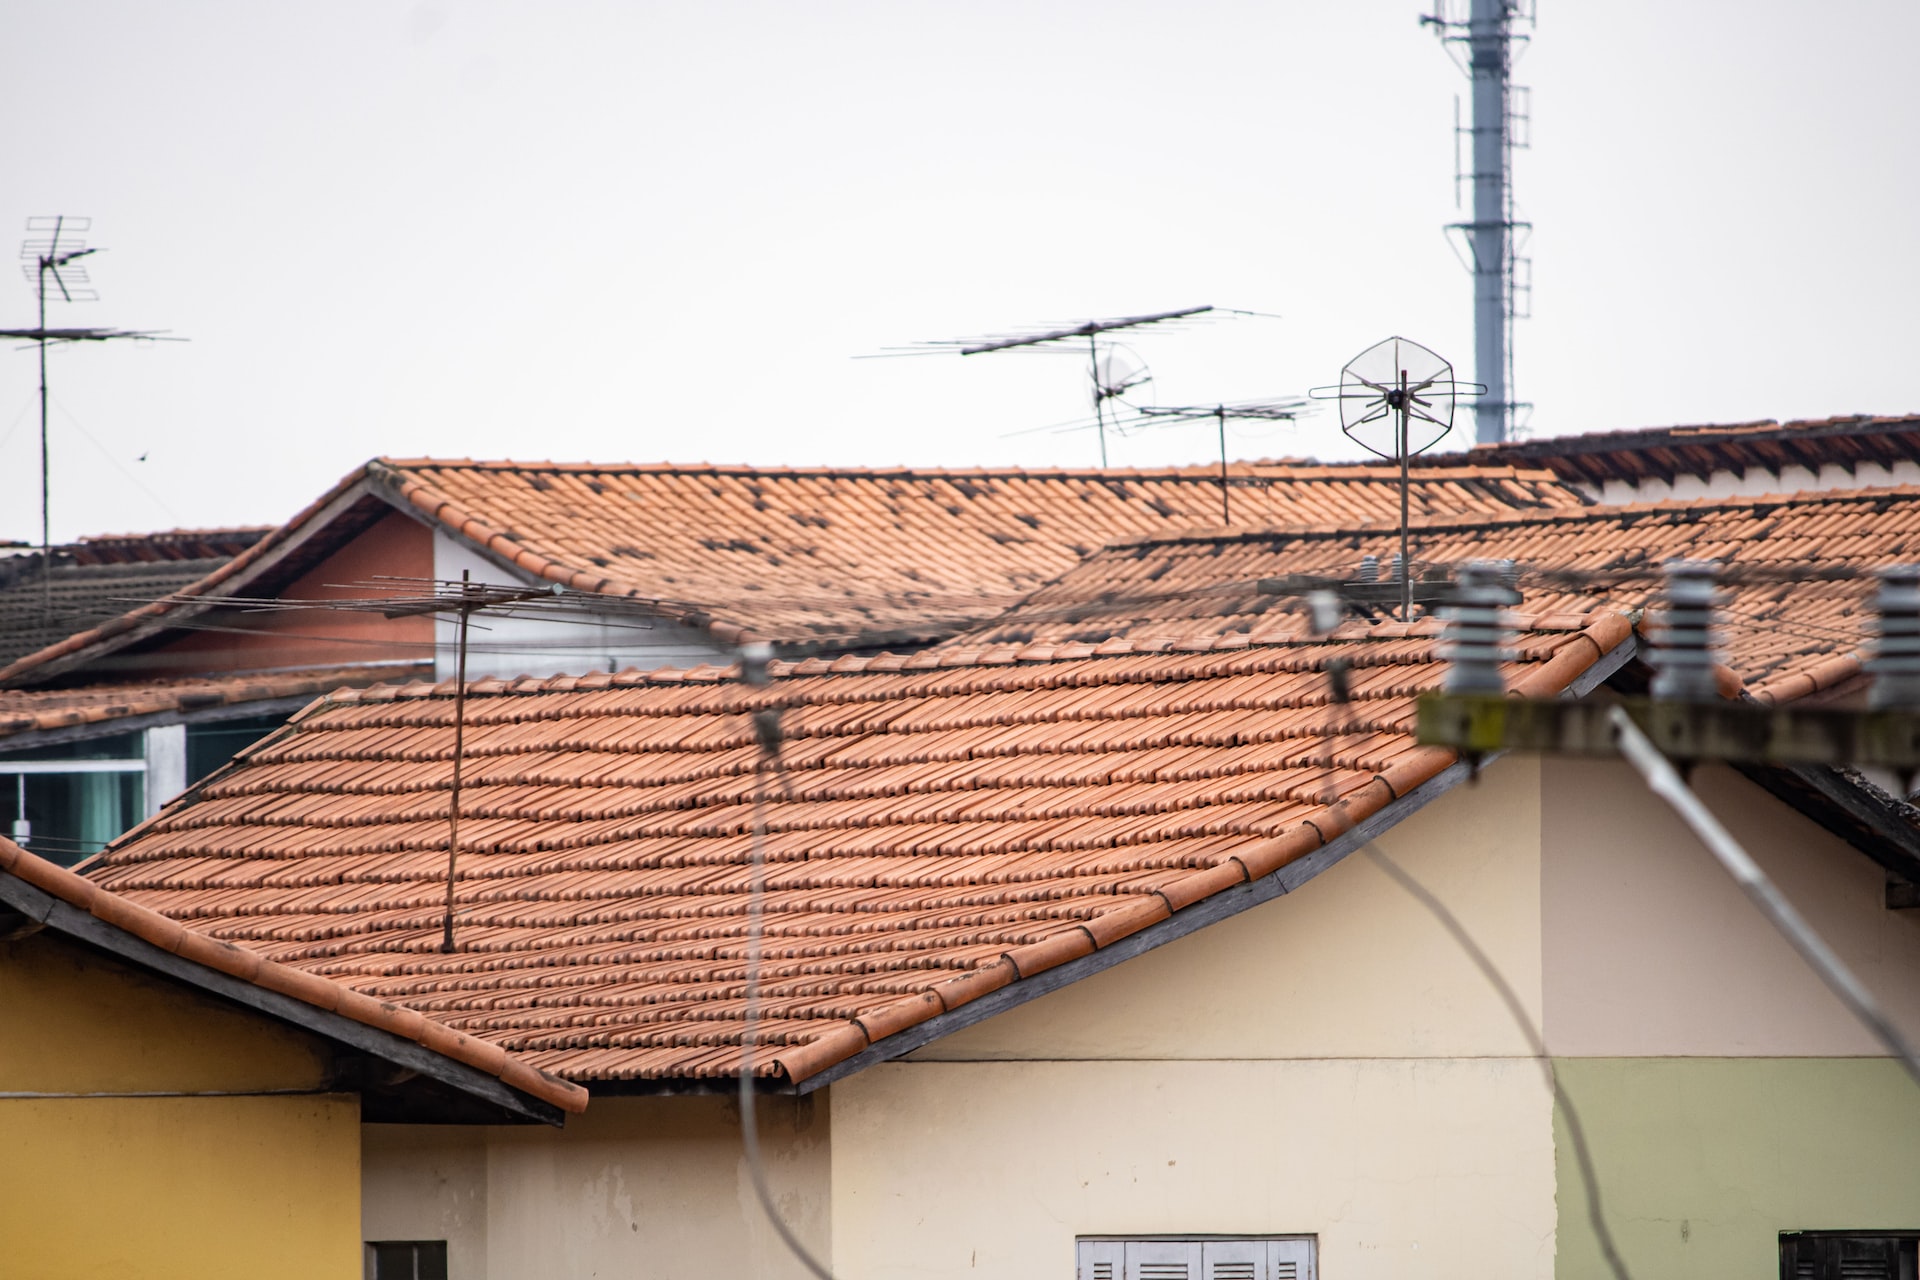 clay tiles on a roof falling apart due to age